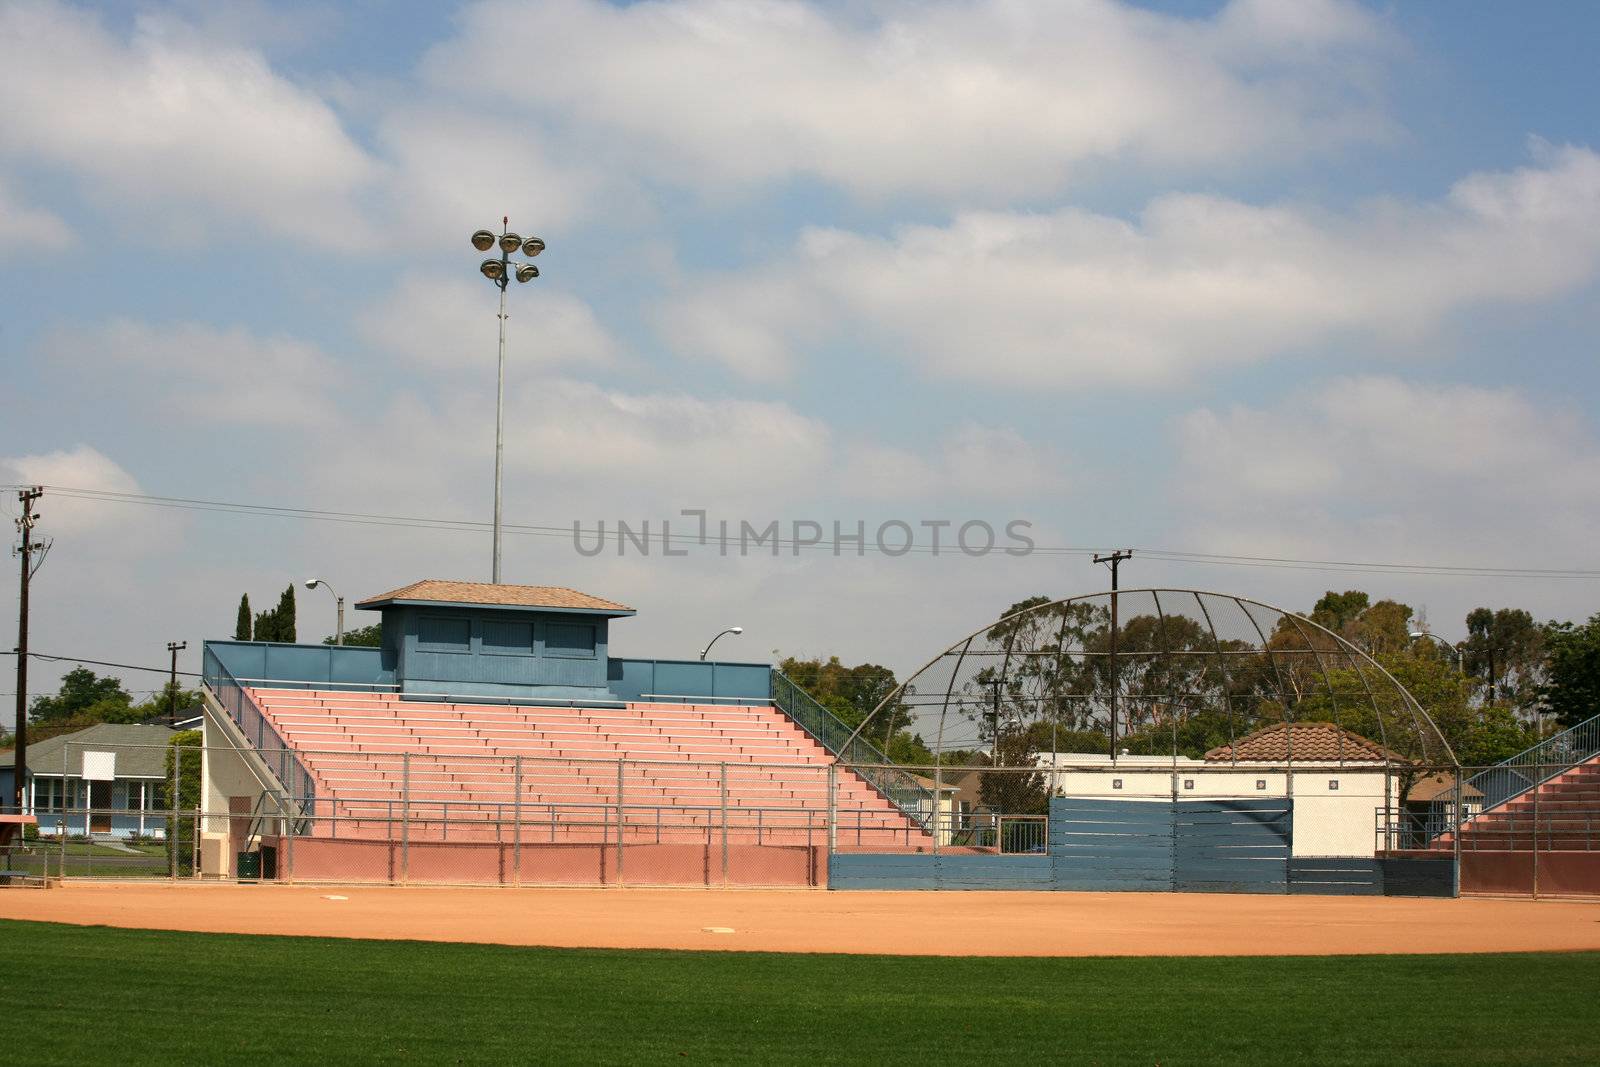 Sports backstop and stadium bleachers ready for a softball or baseball game